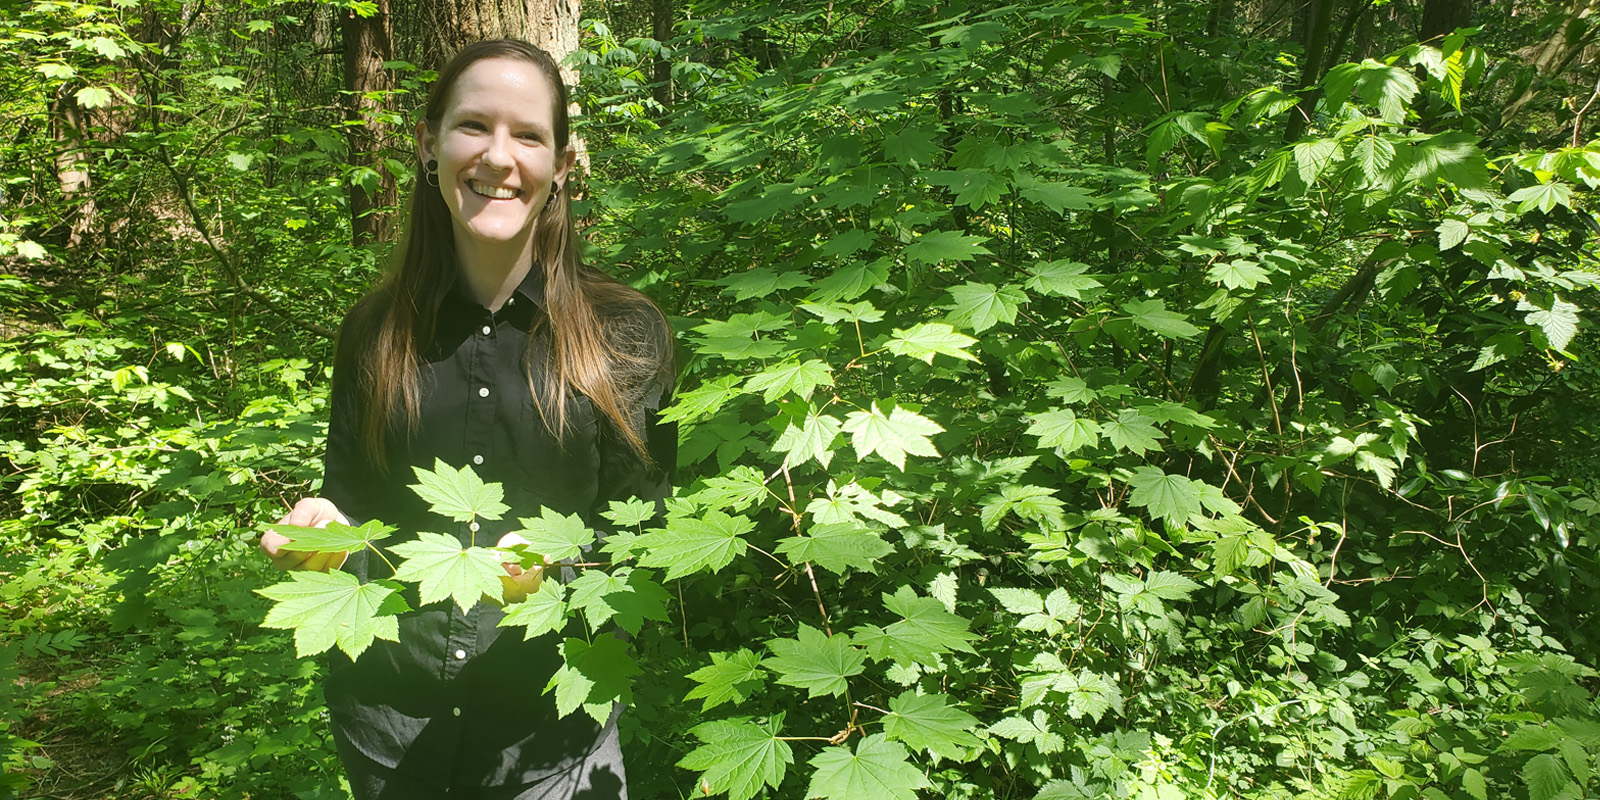 Erin Rutherford smiles surrounded by green leaves in a natural landscape, wearing all black